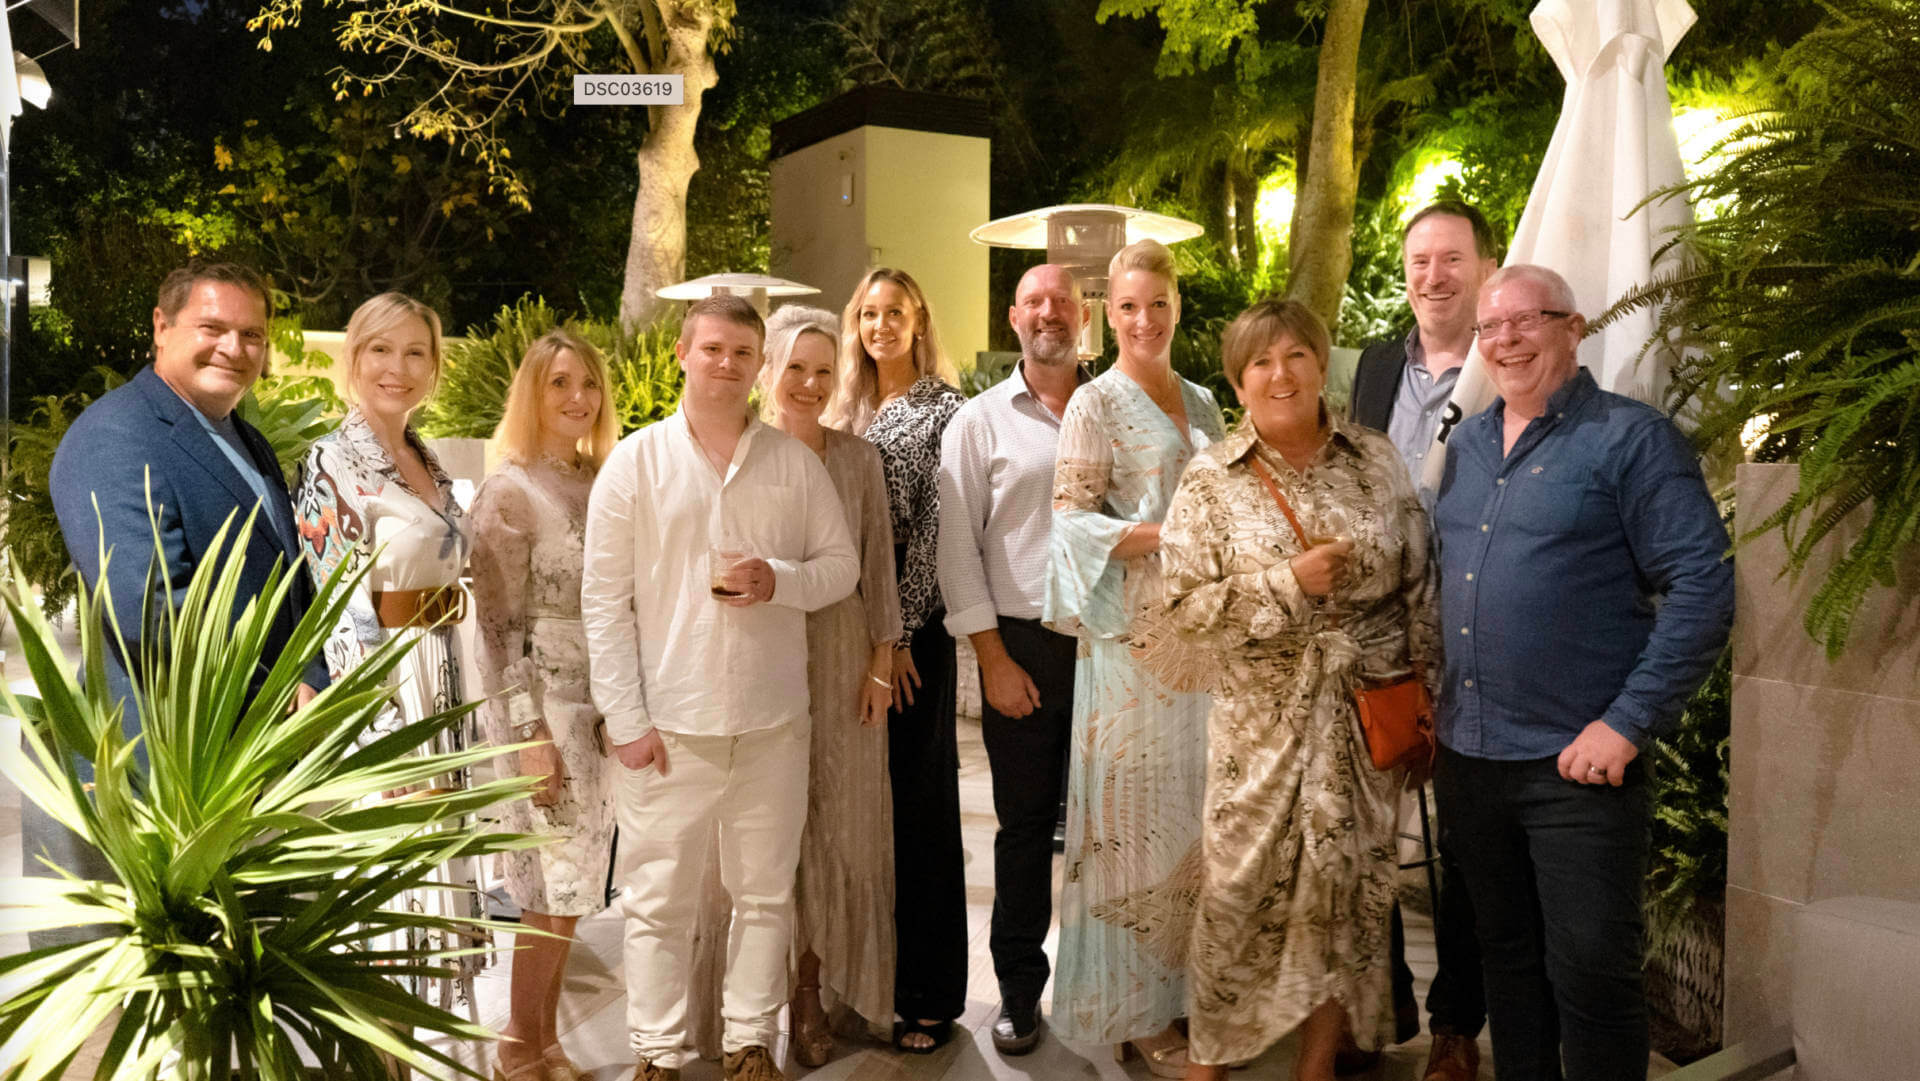 THE GUILD OF SPANISH PROPERTY PROFESSIONALS LAUNCHES AT BREATHE RESTAURANT IN MARBELLA